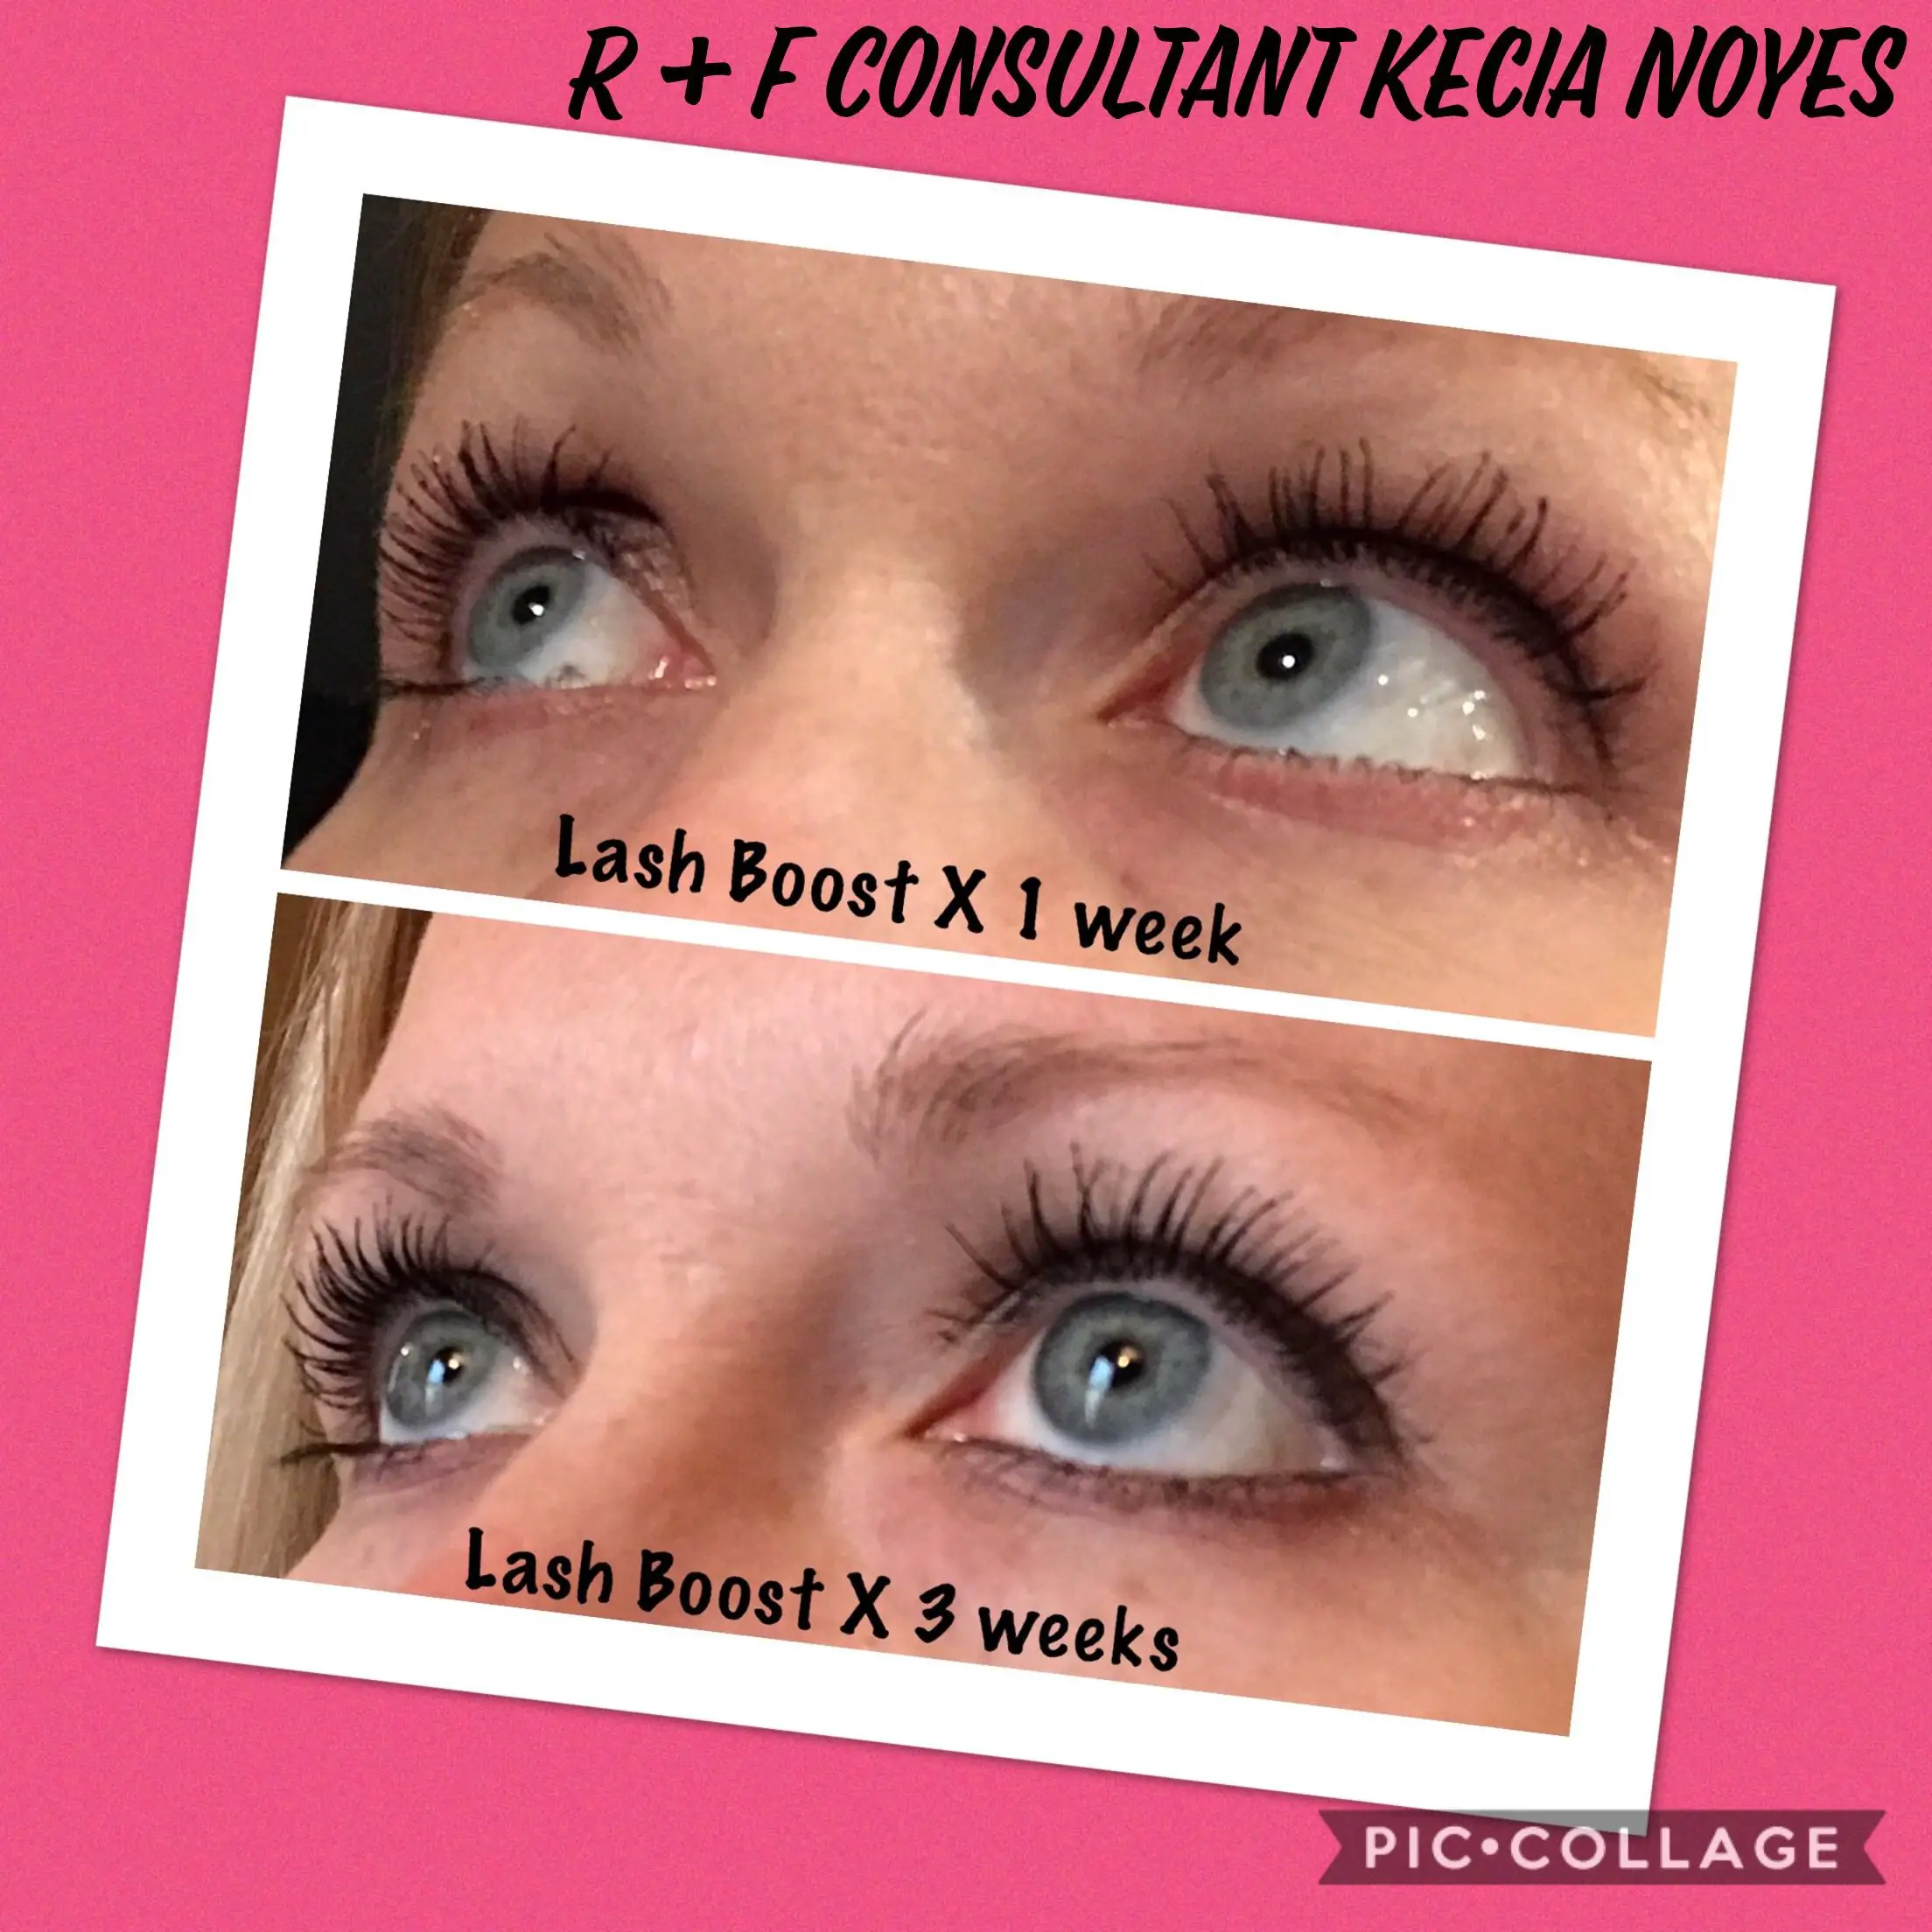 Lash Boost By Rodan And Fields How To Use : Although rodan + fields ...